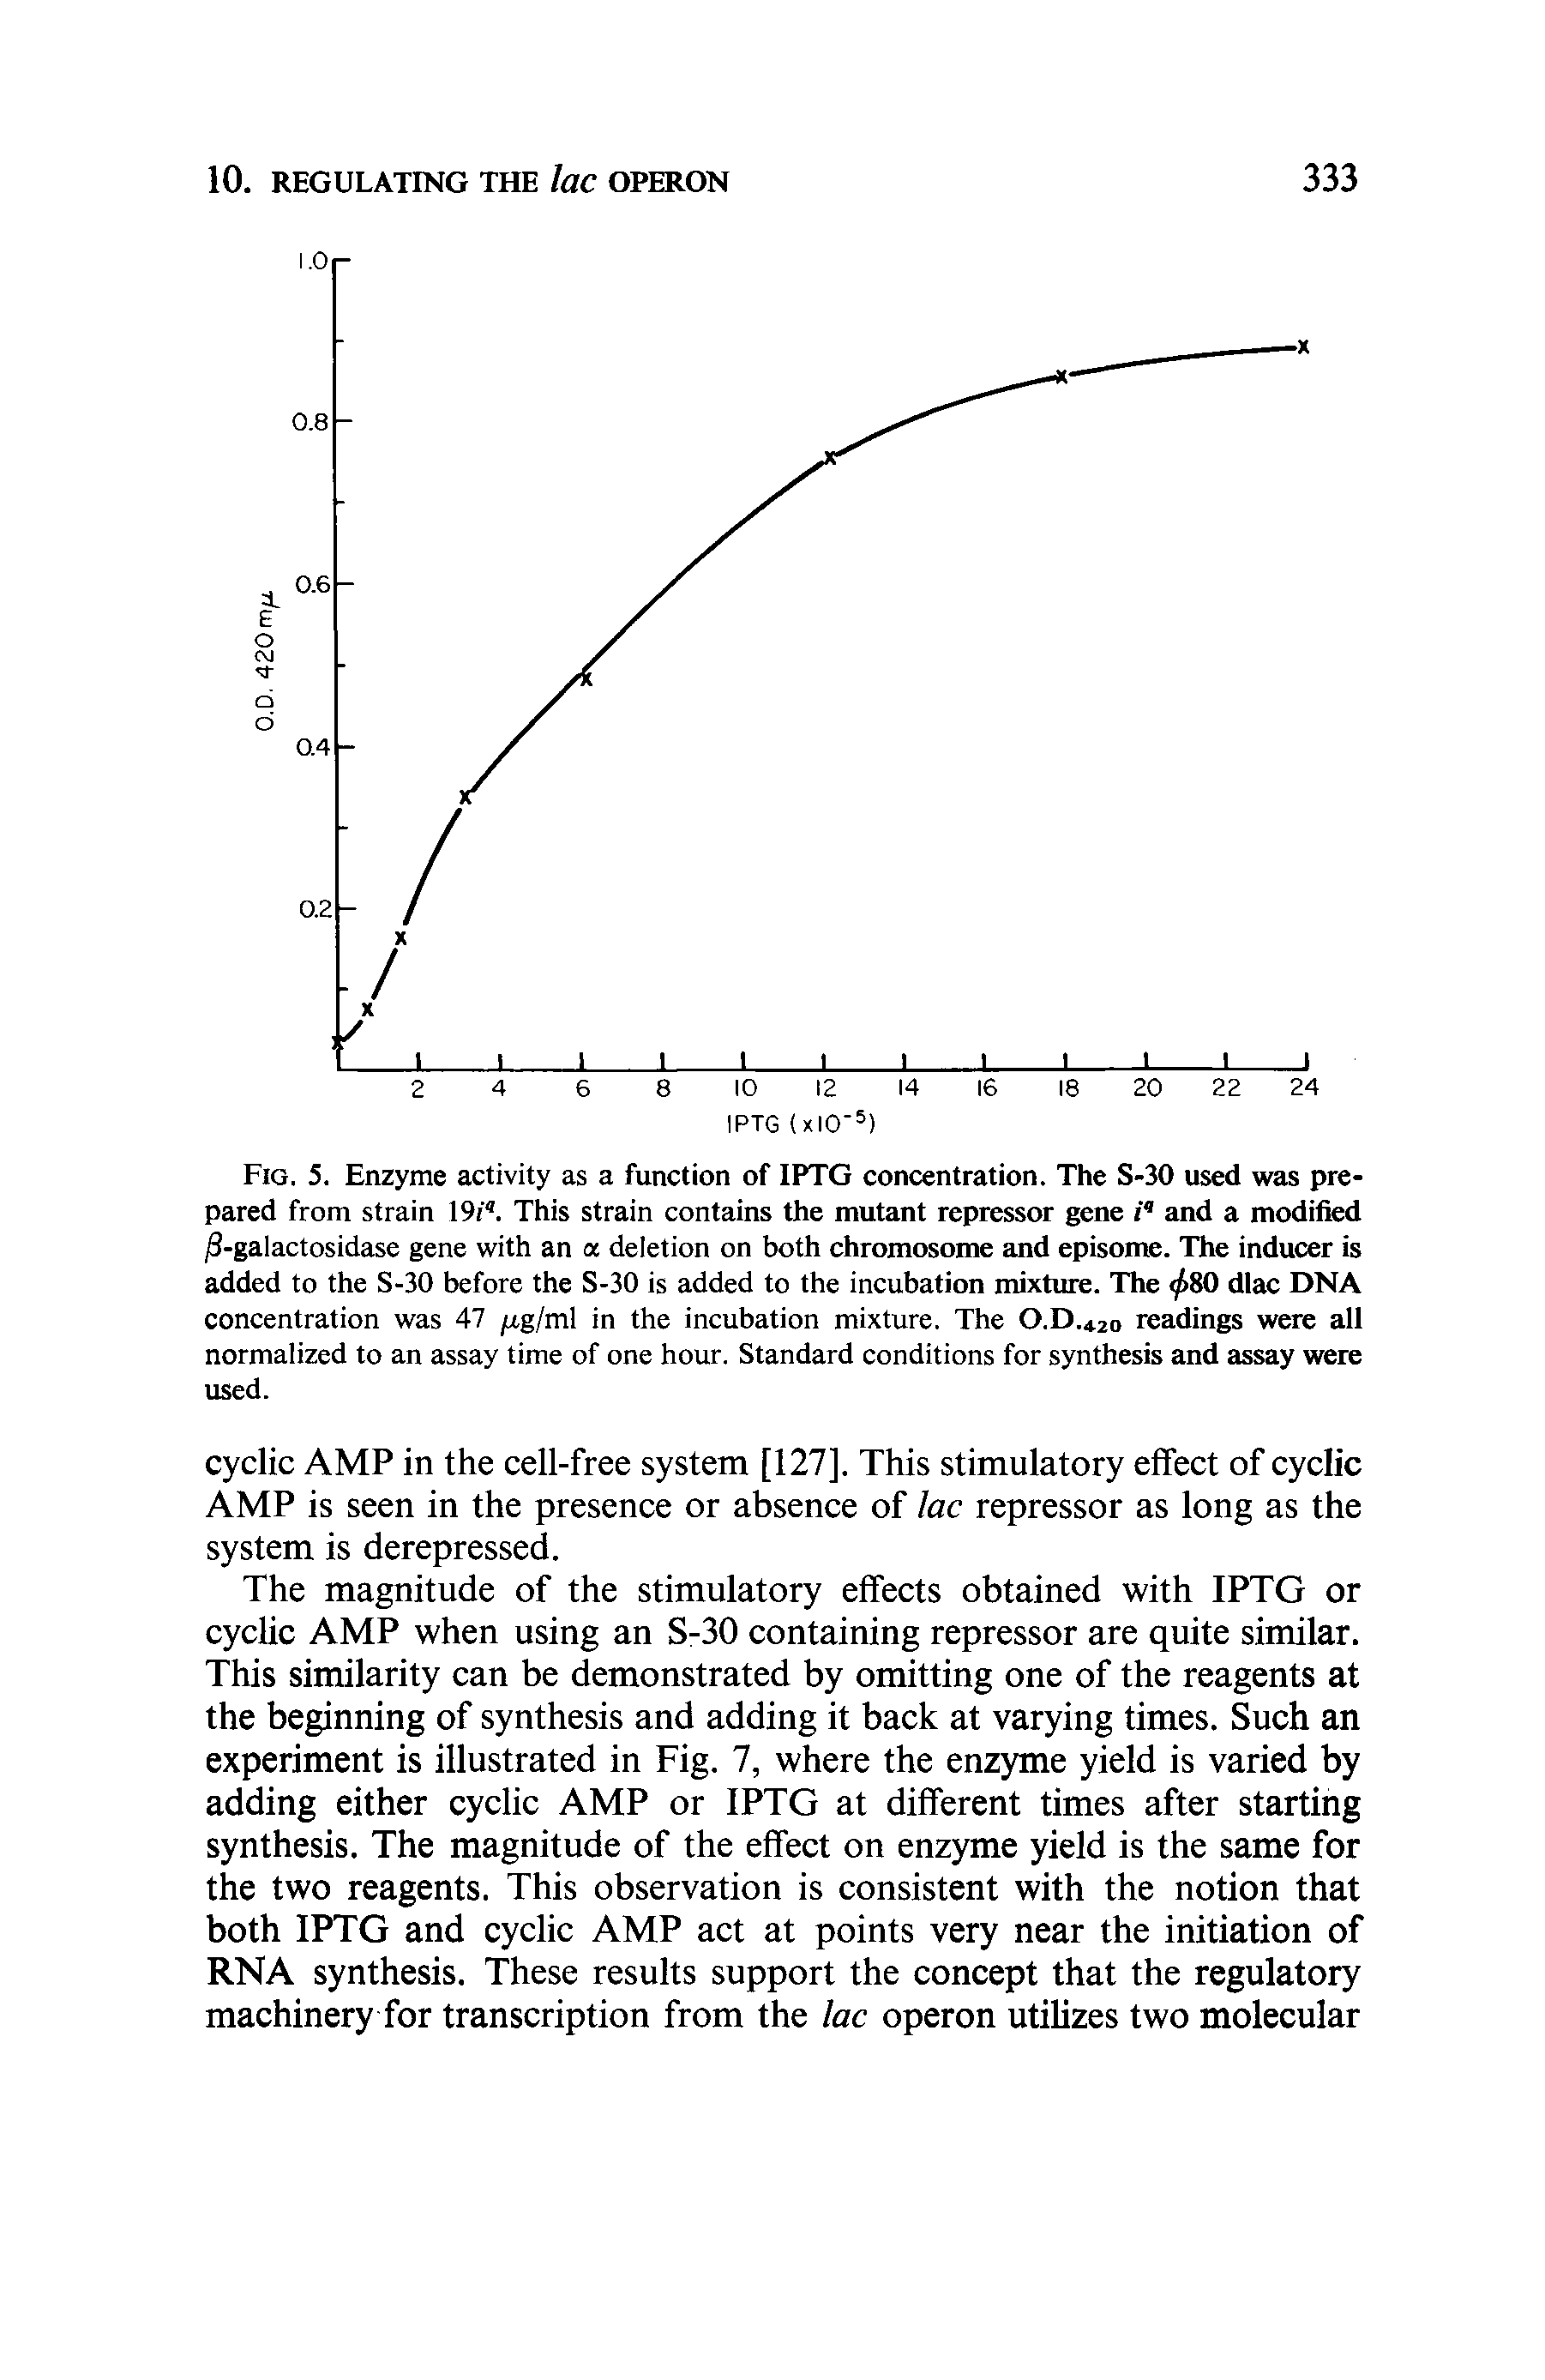 Fig. 5. Enzyme activity as a function of IPTG concentration. The S-30 used was prepared from strain 19i . This strain contains the mutant repressor gene / and a modified 3-galactosidase gene with an a deletion on both chromosome and episome. The inducer is added to the S-30 before the S-30 is added to the incubation mixture. The <f>SO dlac DNA concentration was 47 jug/ml in the incubation mixture. The O.D.4.20 readings were all normalized to an assay time of one hour. Standard conditions for synthesis and assay were used.